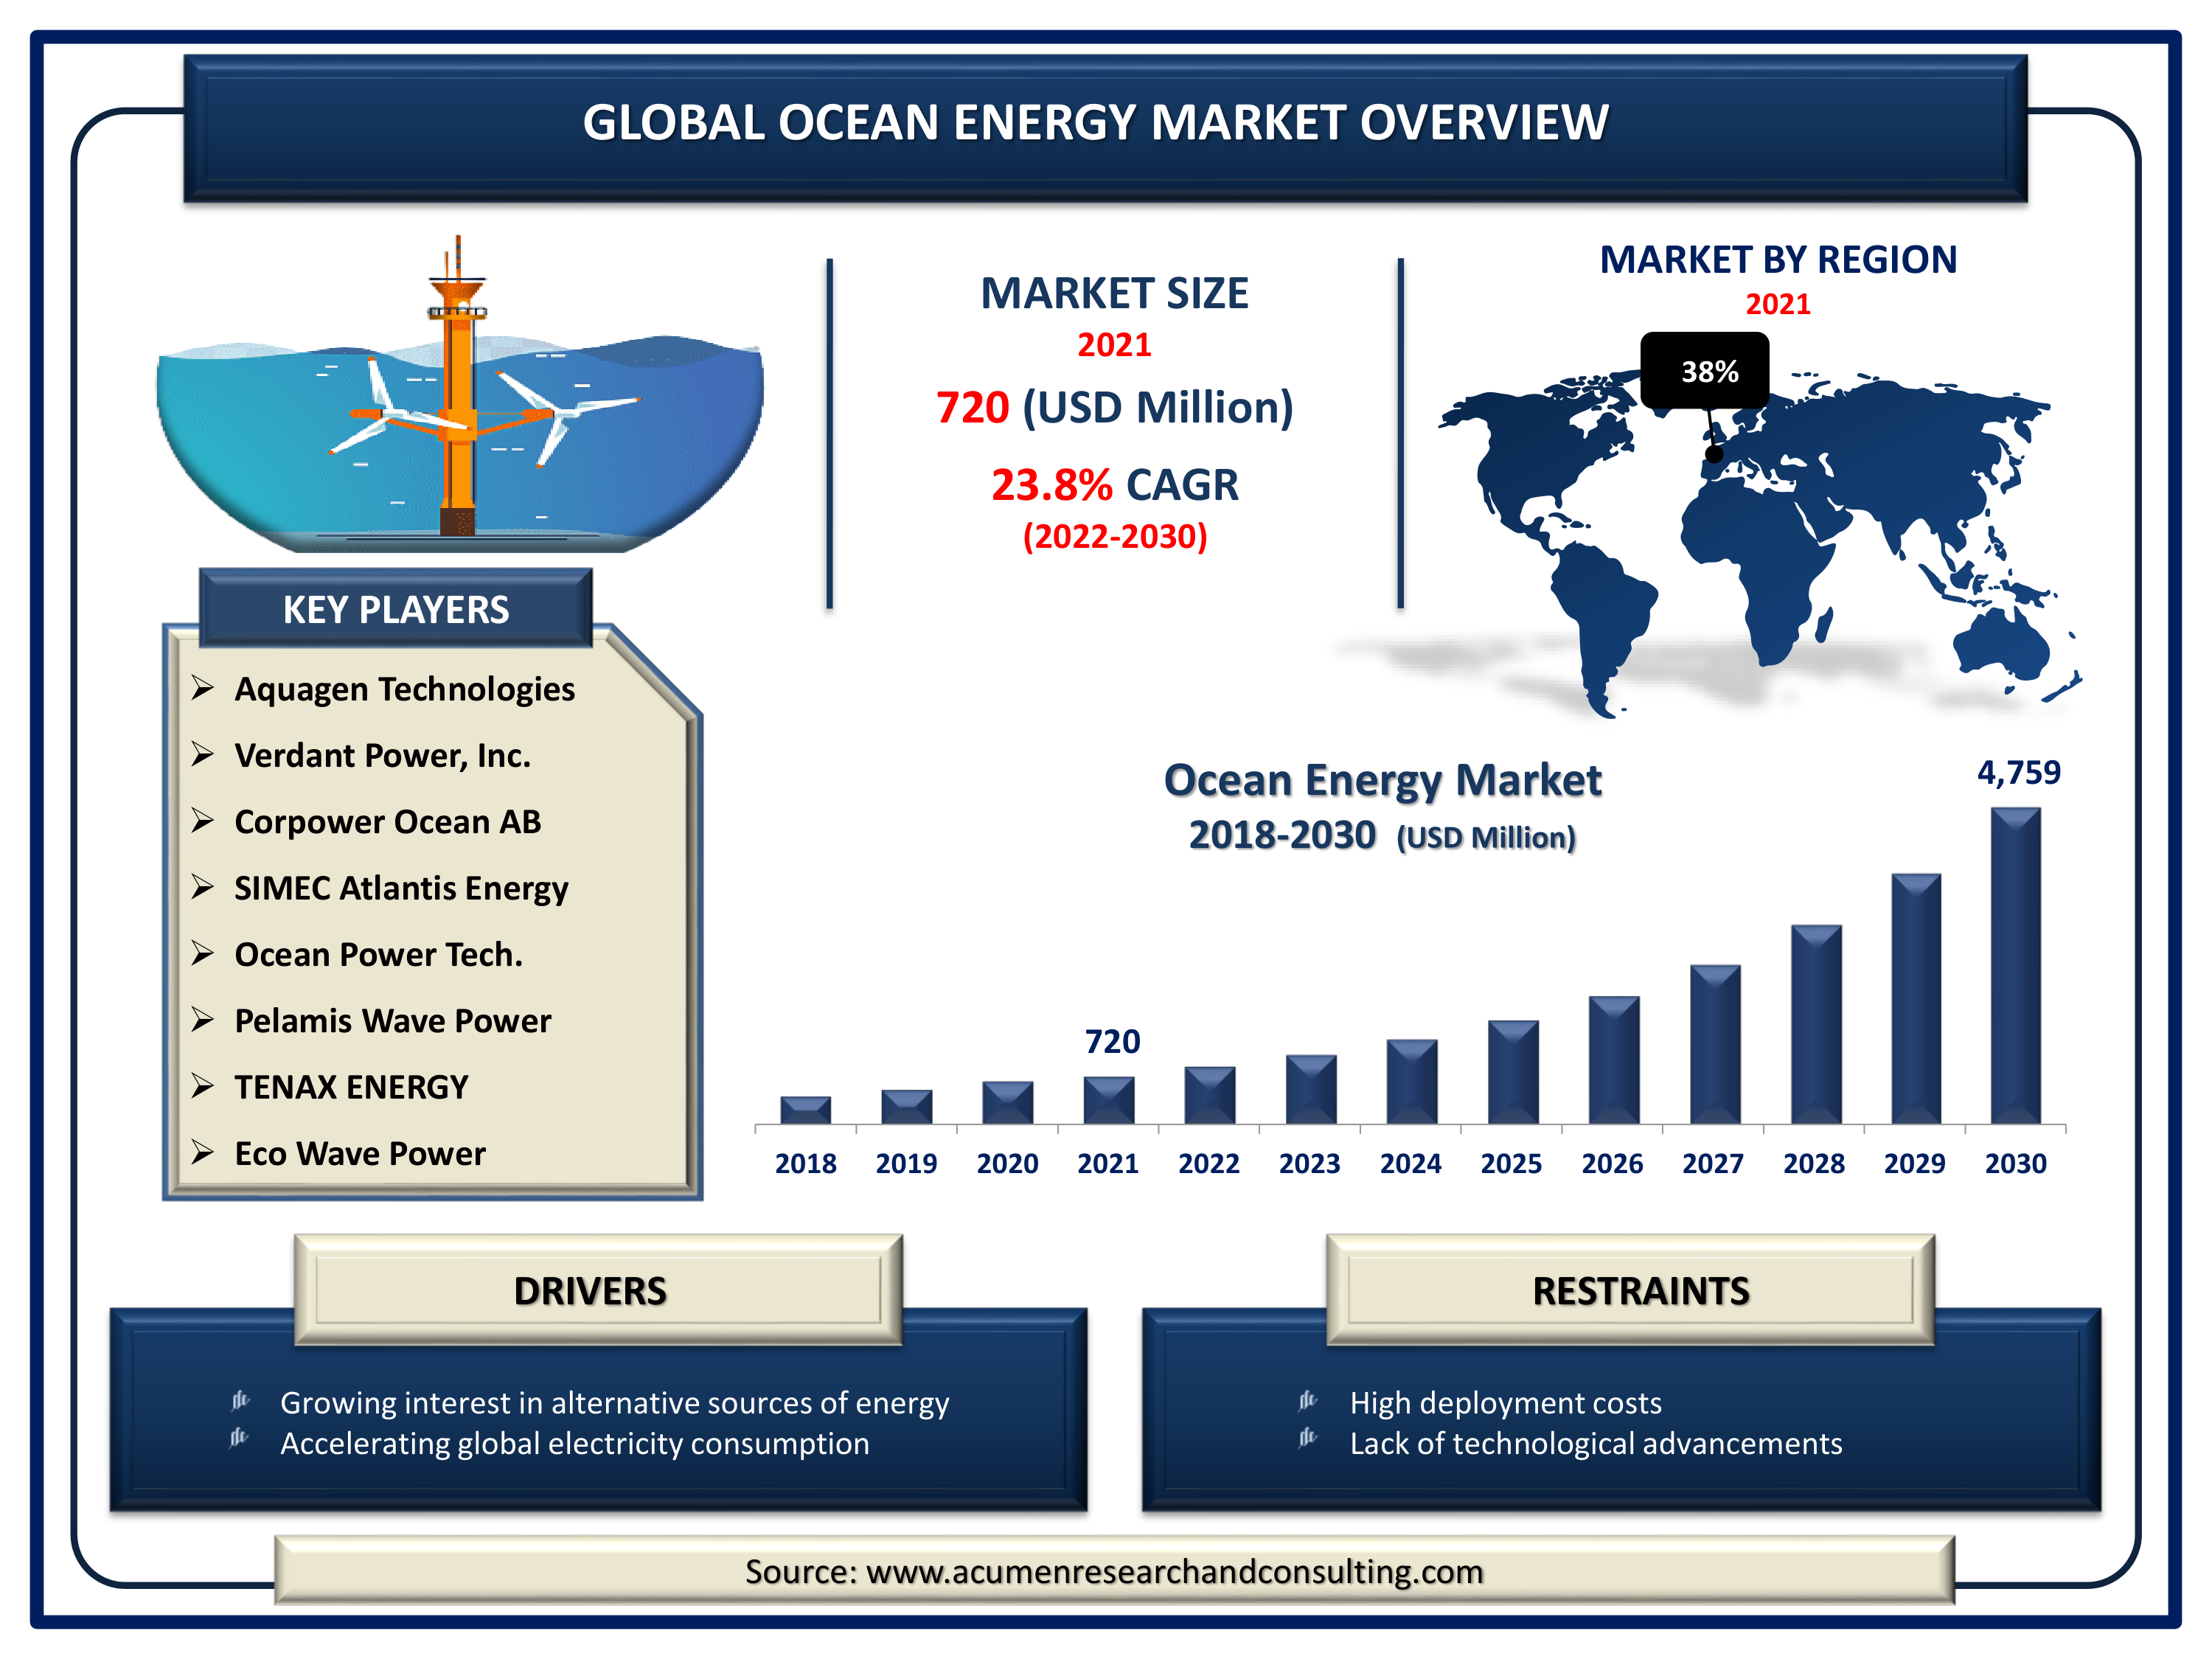 Ocean Energy Market is predicted to be worth USD 4,759 Million by 2030, with a CAGR of 23.8%